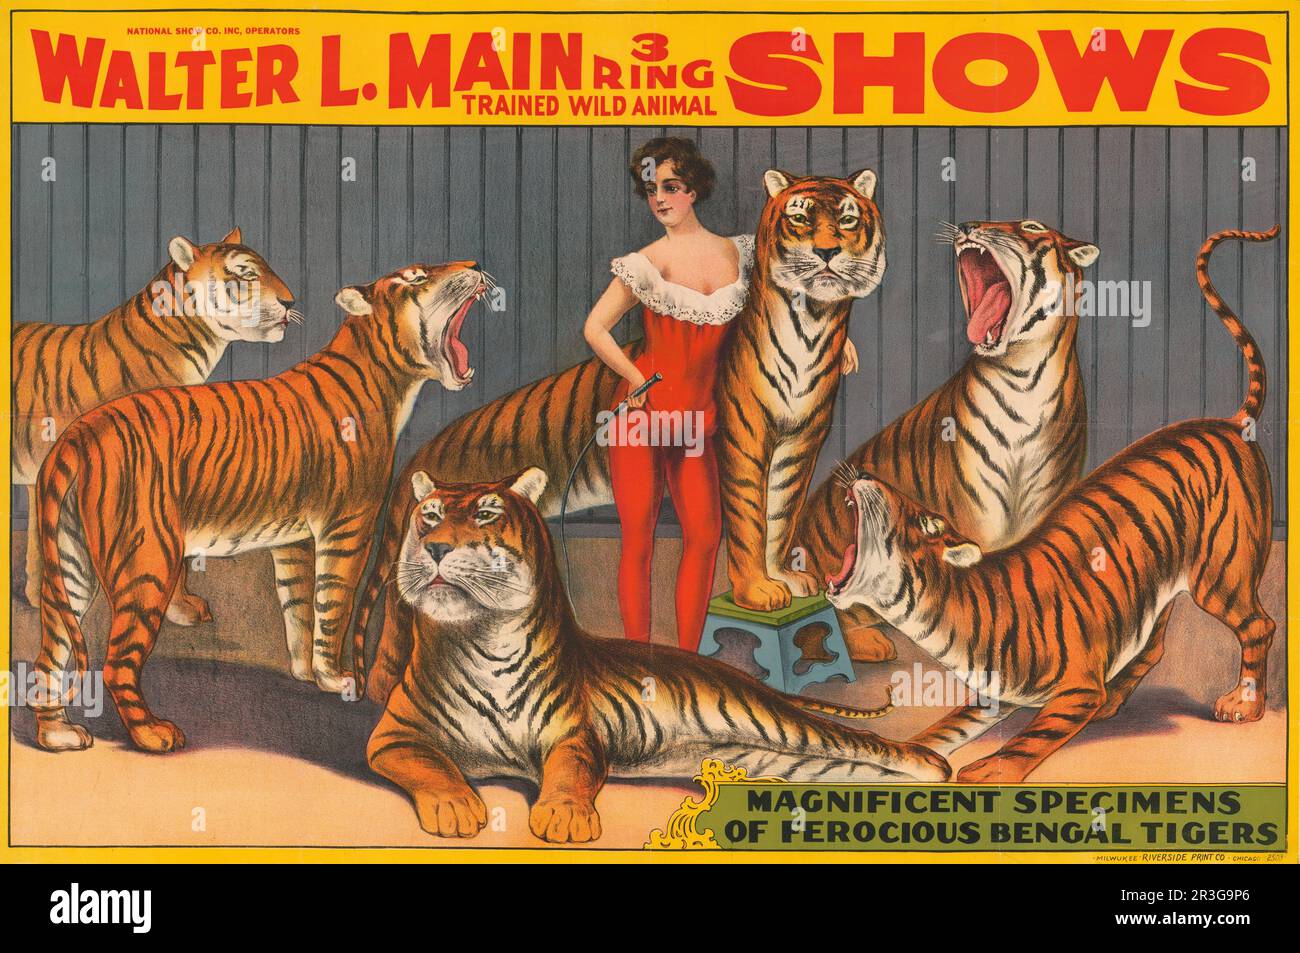 Vintage circus poster showing woman with six tigers. Stock Photo